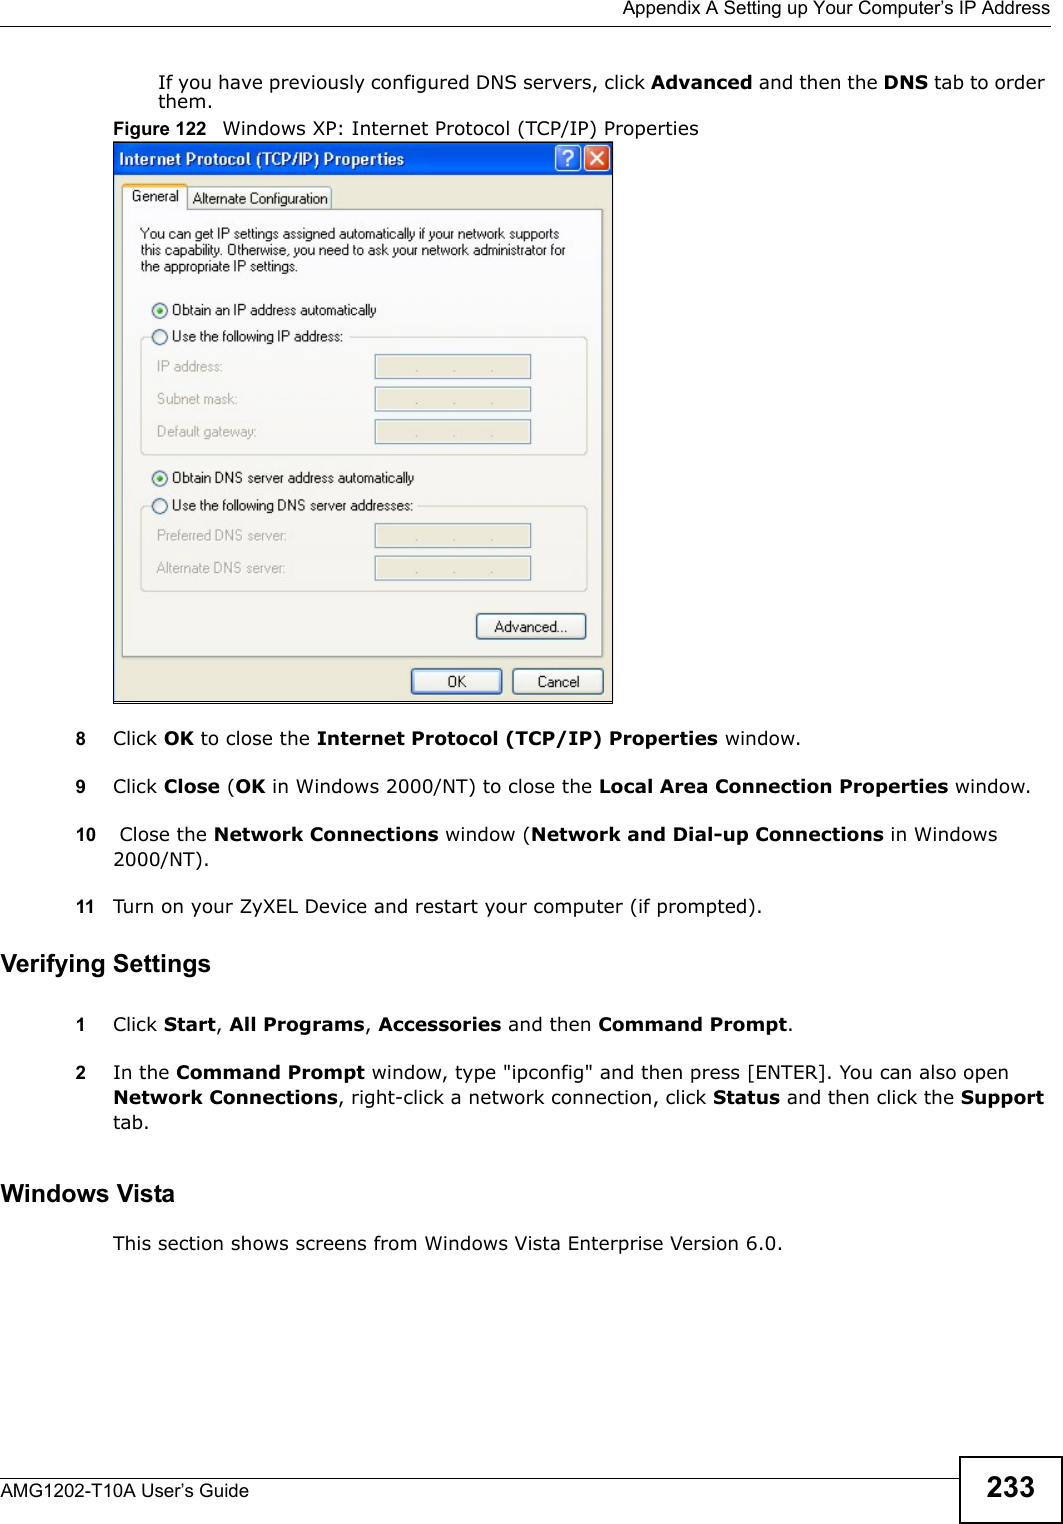  Appendix A Setting up Your Computer’s IP AddressAMG1202-T10A User’s Guide 233If you have previously configured DNS servers, click Advanced and then the DNS tab to order them.Figure 122   Windows XP: Internet Protocol (TCP/IP) Properties8Click OK to close the Internet Protocol (TCP/IP) Properties window.9Click Close (OK in Windows 2000/NT) to close the Local Area Connection Properties window.10  Close the Network Connections window (Network and Dial-up Connections in Windows 2000/NT).11 Turn on your ZyXEL Device and restart your computer (if prompted).Verifying Settings1Click Start, All Programs, Accessories and then Command Prompt.2In the Command Prompt window, type &quot;ipconfig&quot; and then press [ENTER]. You can also open Network Connections, right-click a network connection, click Status and then click the Support tab.Windows VistaThis section shows screens from Windows Vista Enterprise Version 6.0.